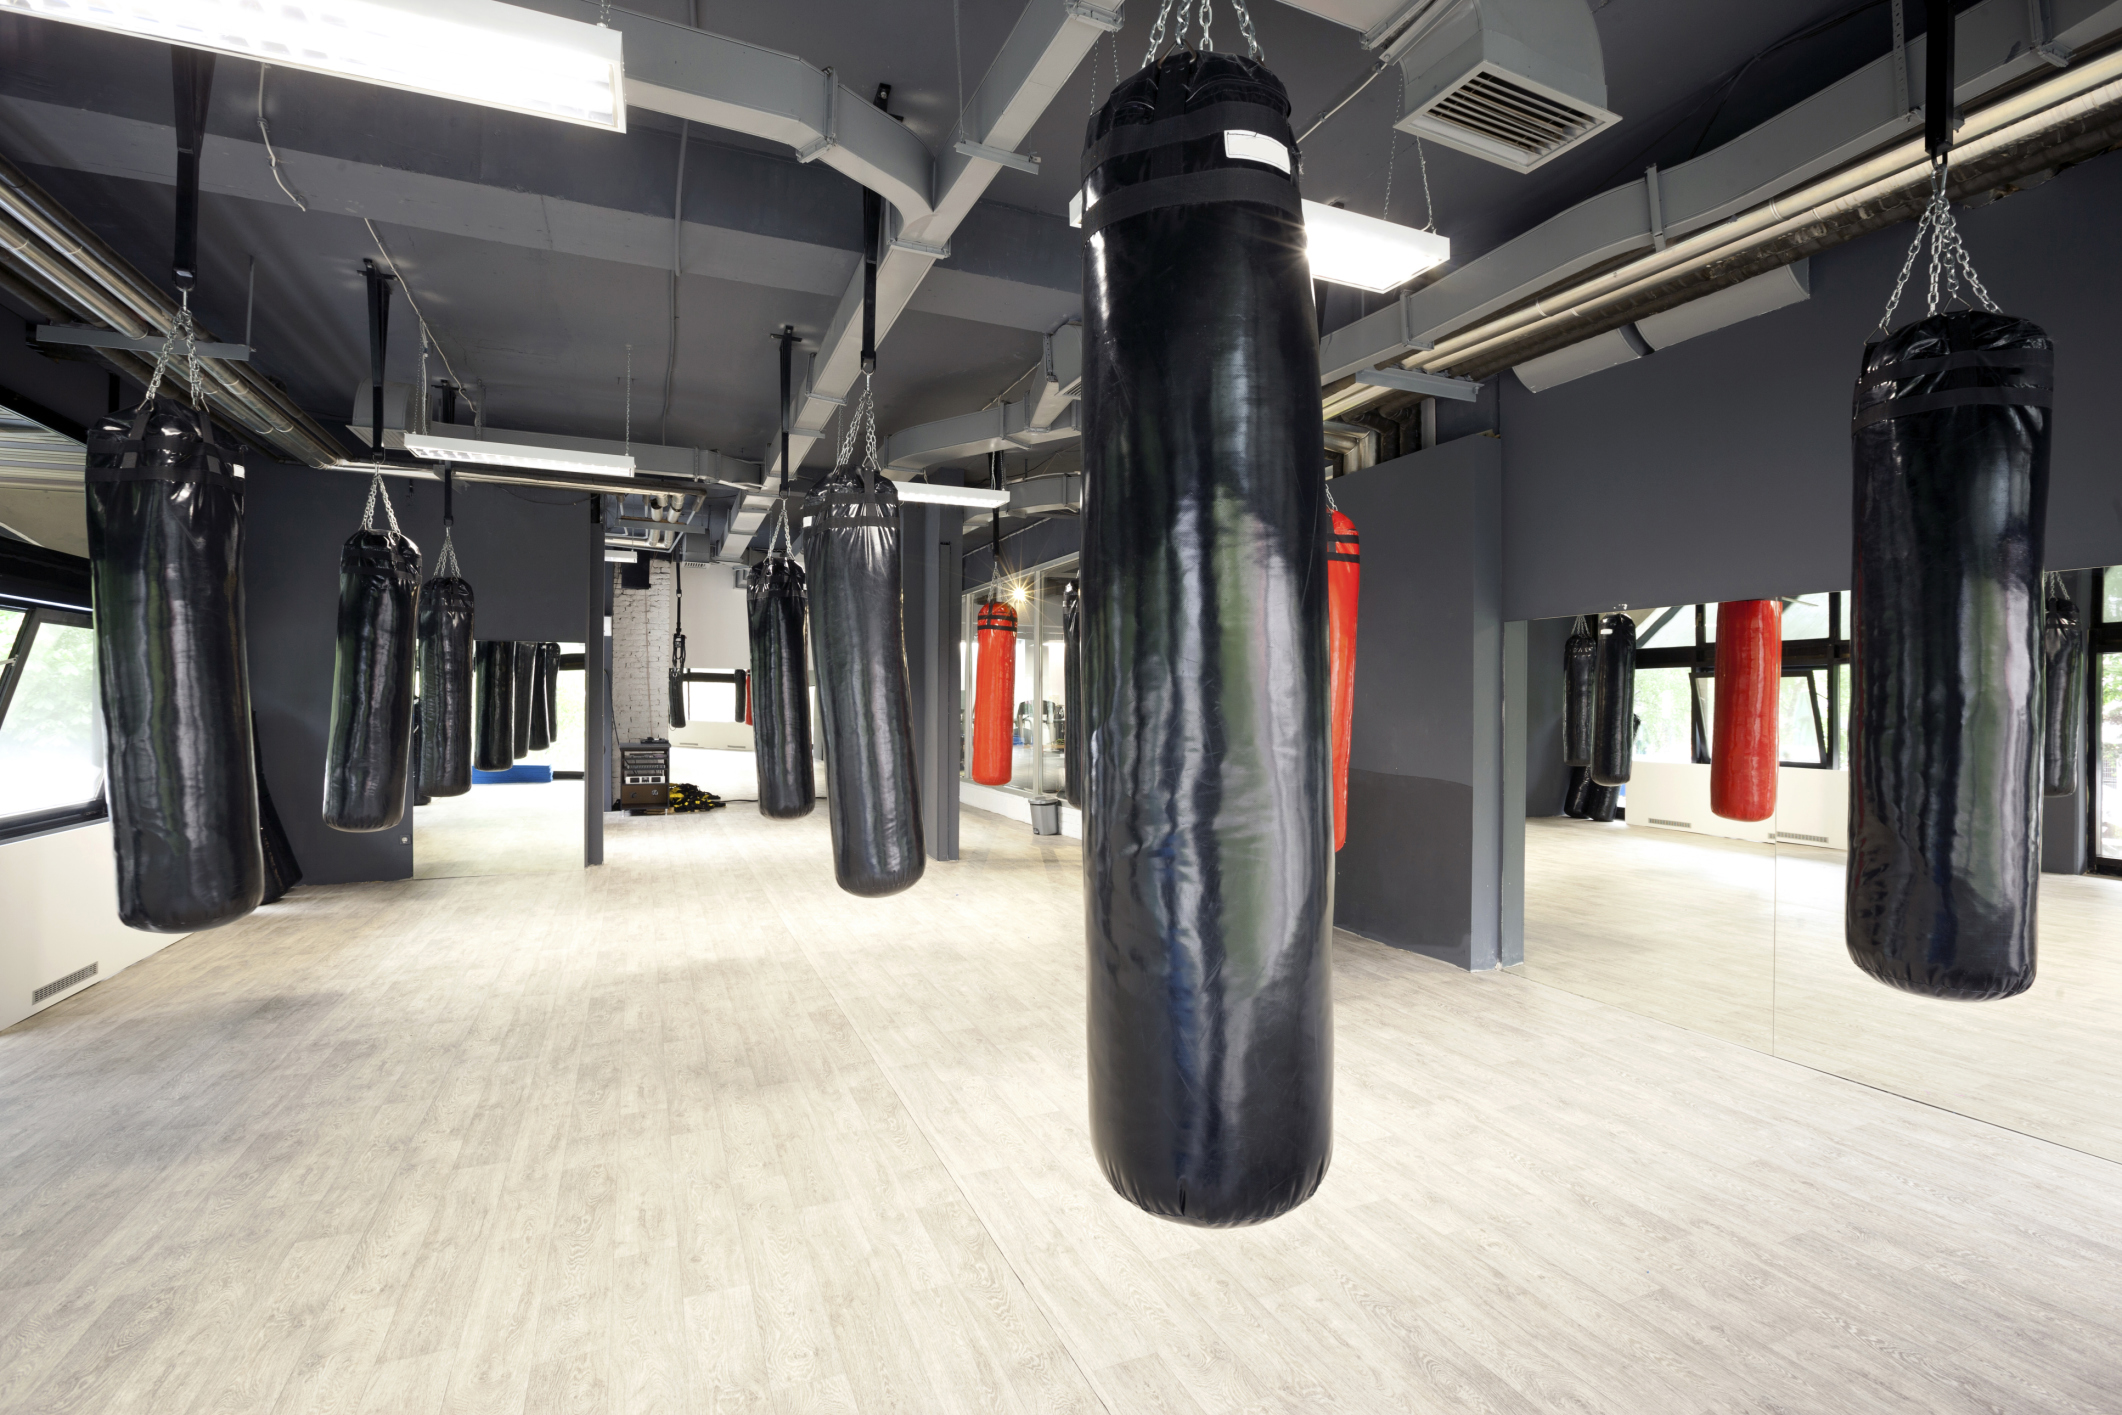 How To Fill A Punching Bag – 5 Easy Steps – The Basement Warrior